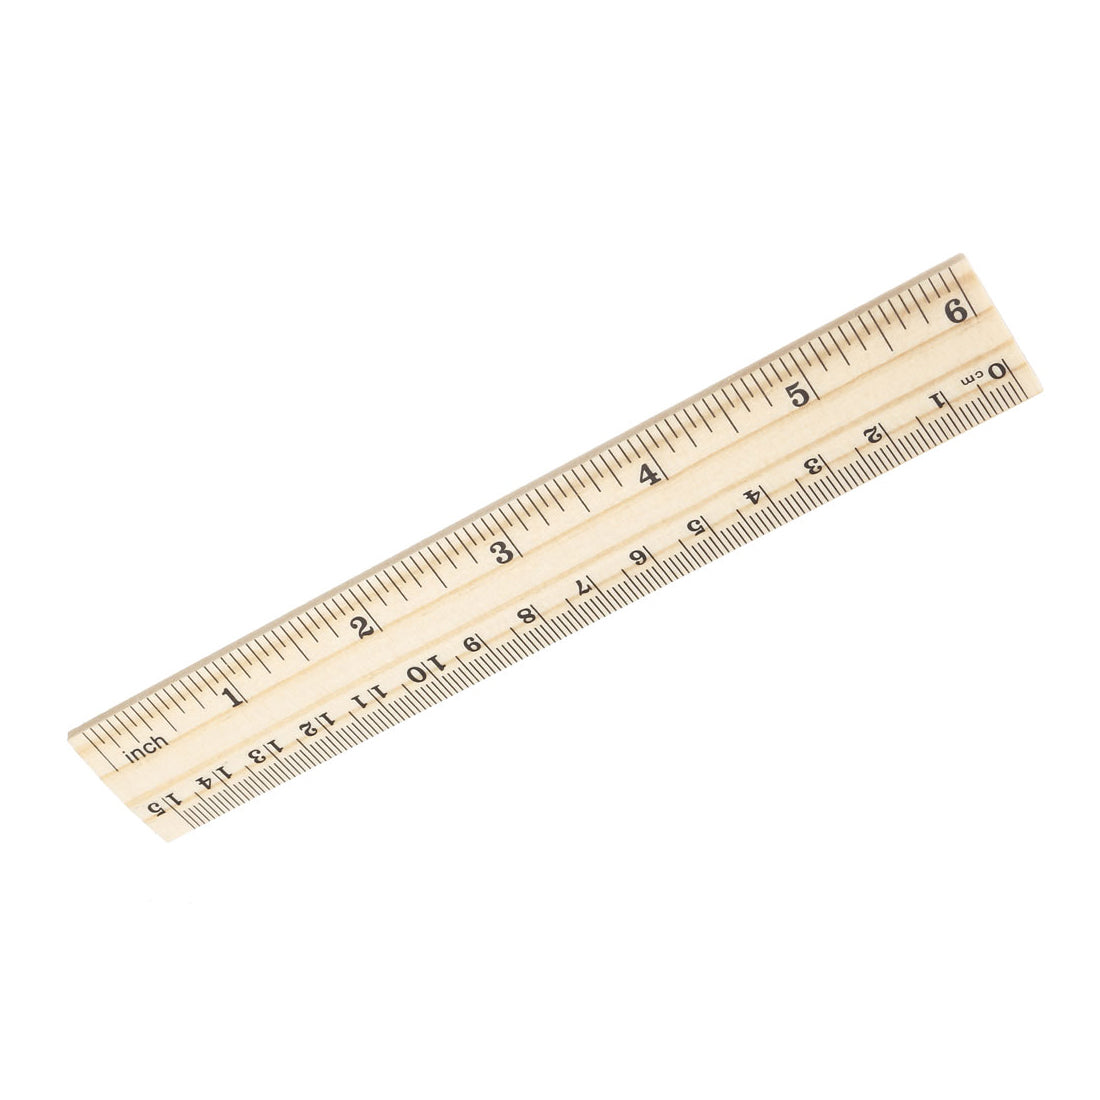 uxcell Uxcell Wood Ruler 15cm 6 Inch 2 Scale Office Rulers Wooden Measuring Ruler 5pcs